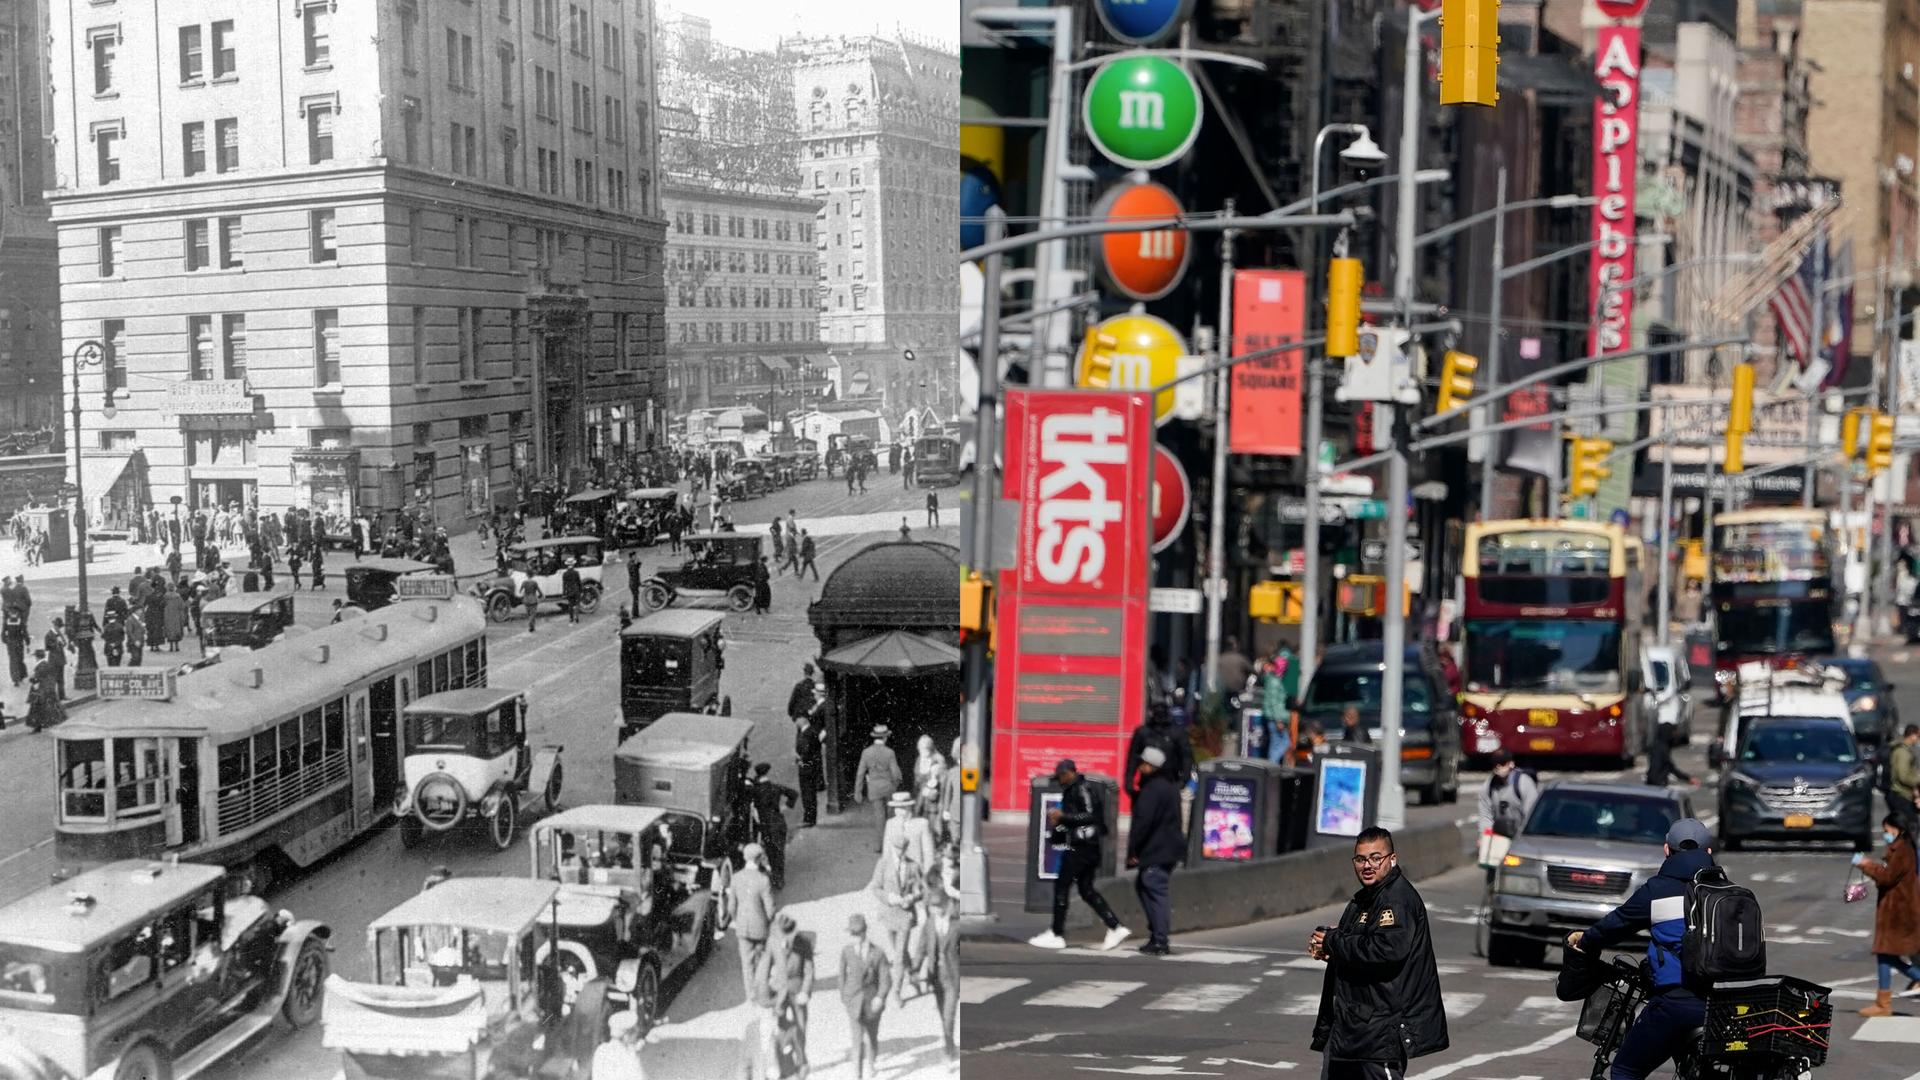 A black and white photo on the left shows street cars and other 1920s era automobiles with a photo on the right showing a modern day traffic scene.